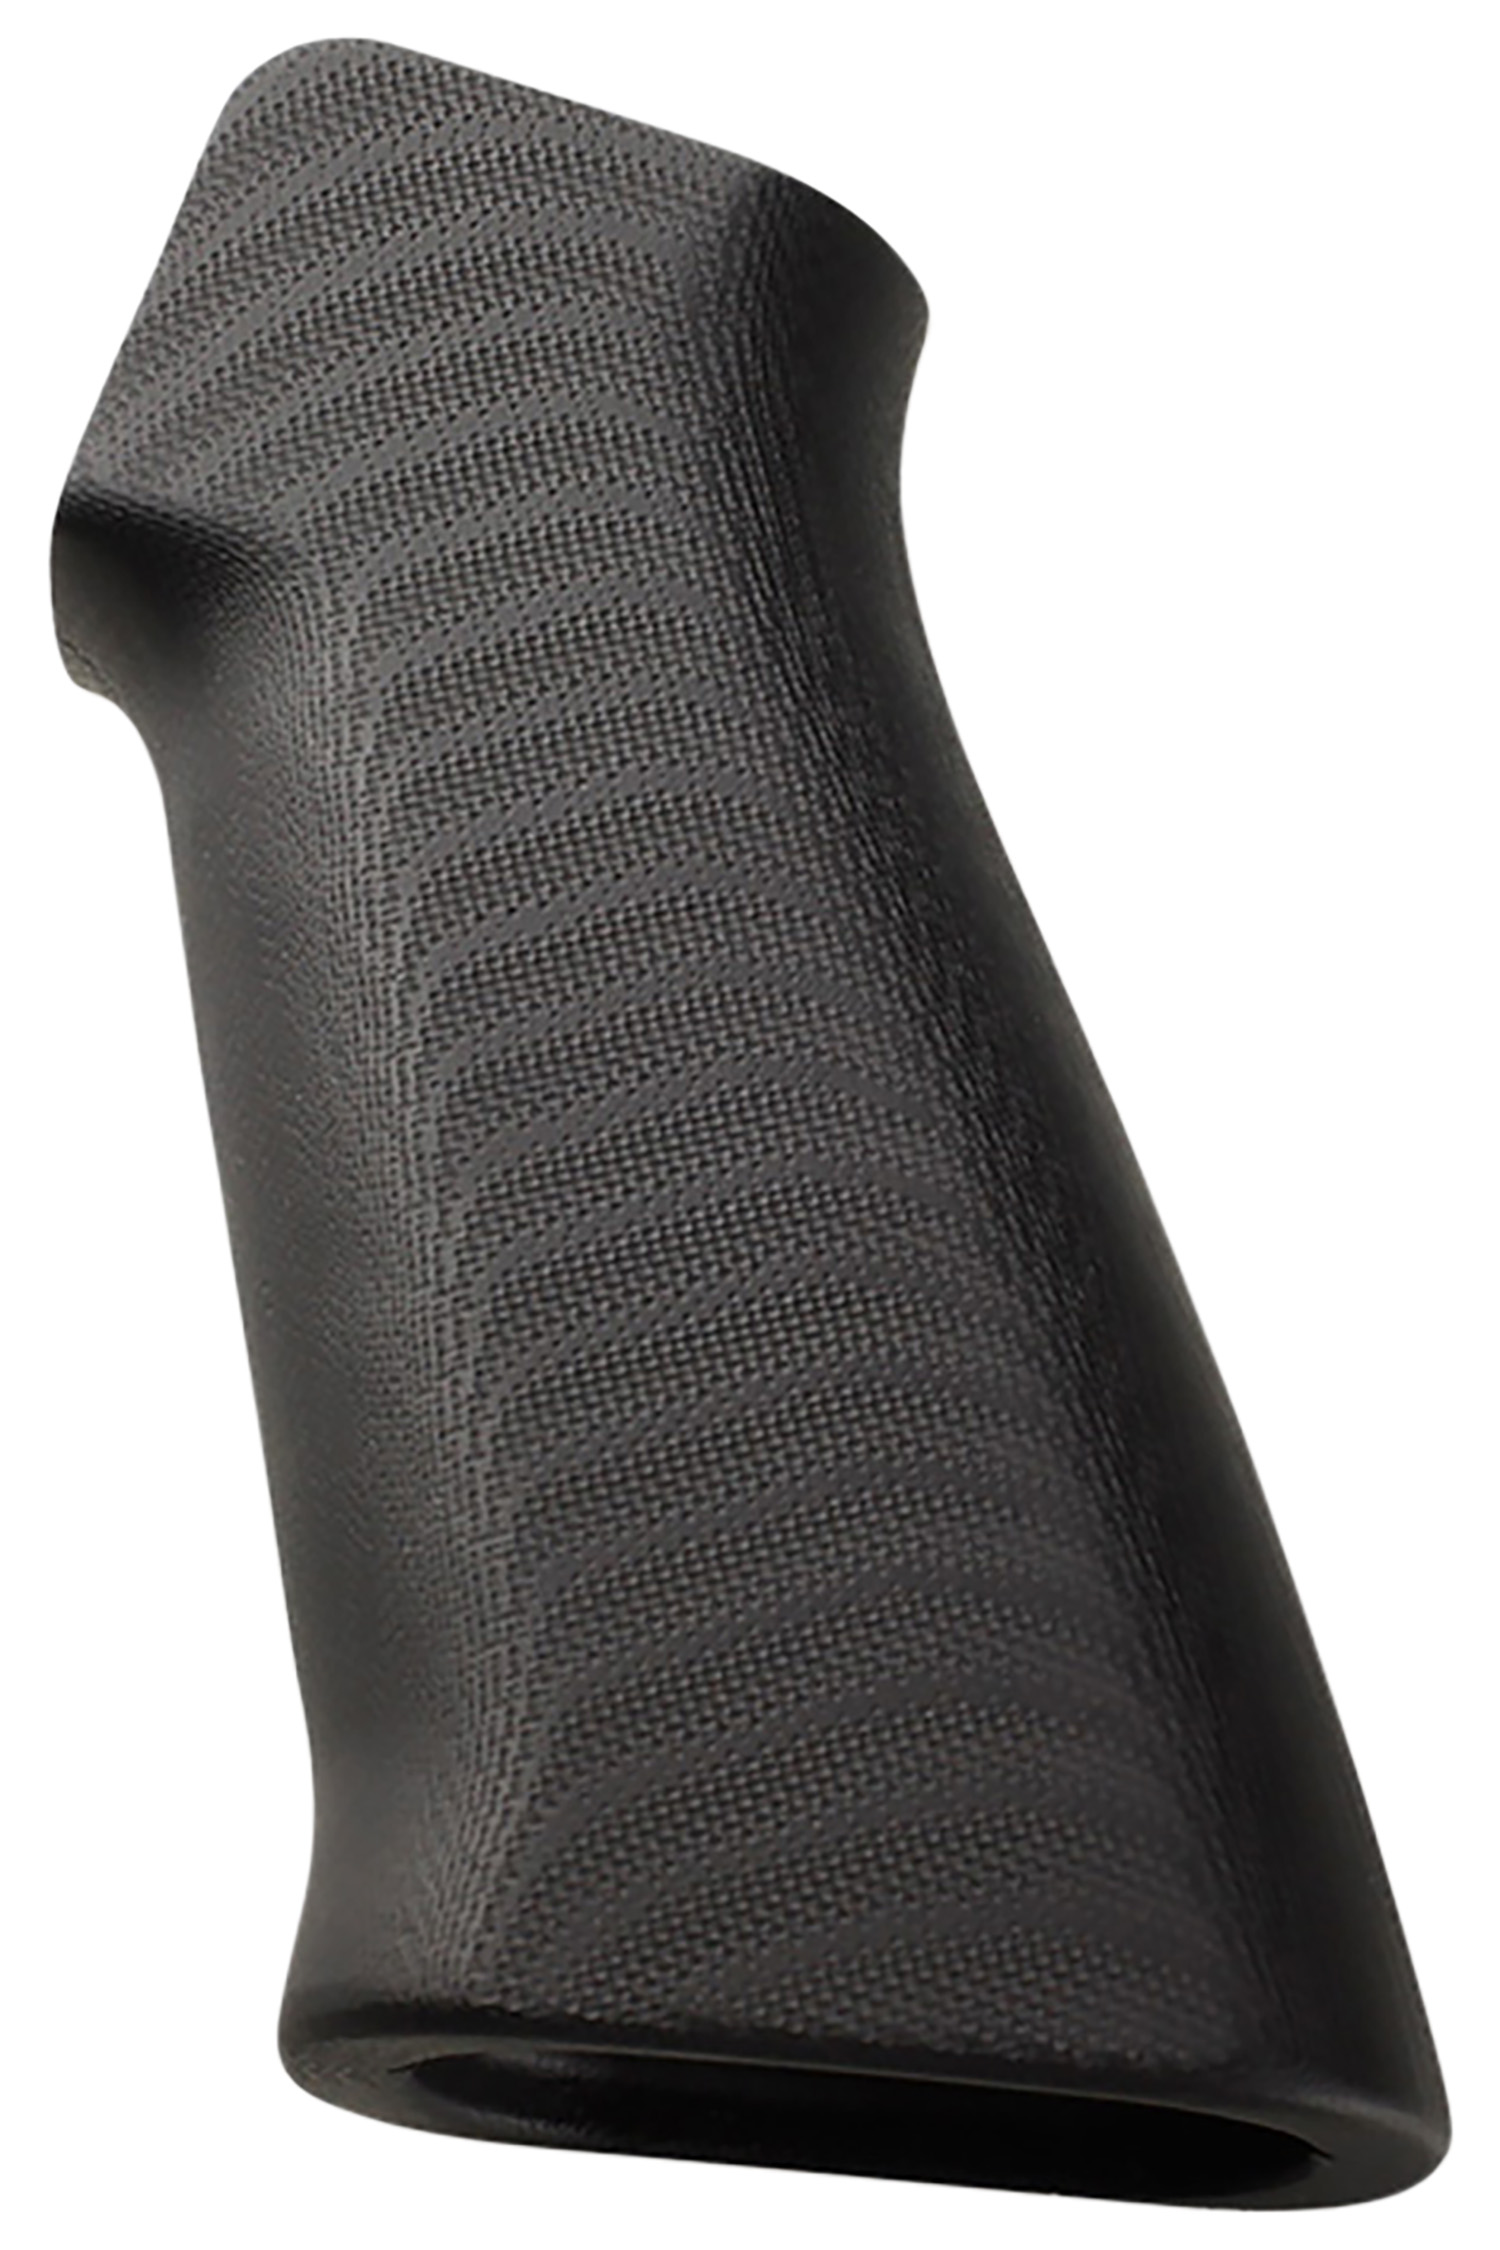 Hogue 13169 Pistol Grip  Made of G10 With Black Smooth Finish for AR-15, M16